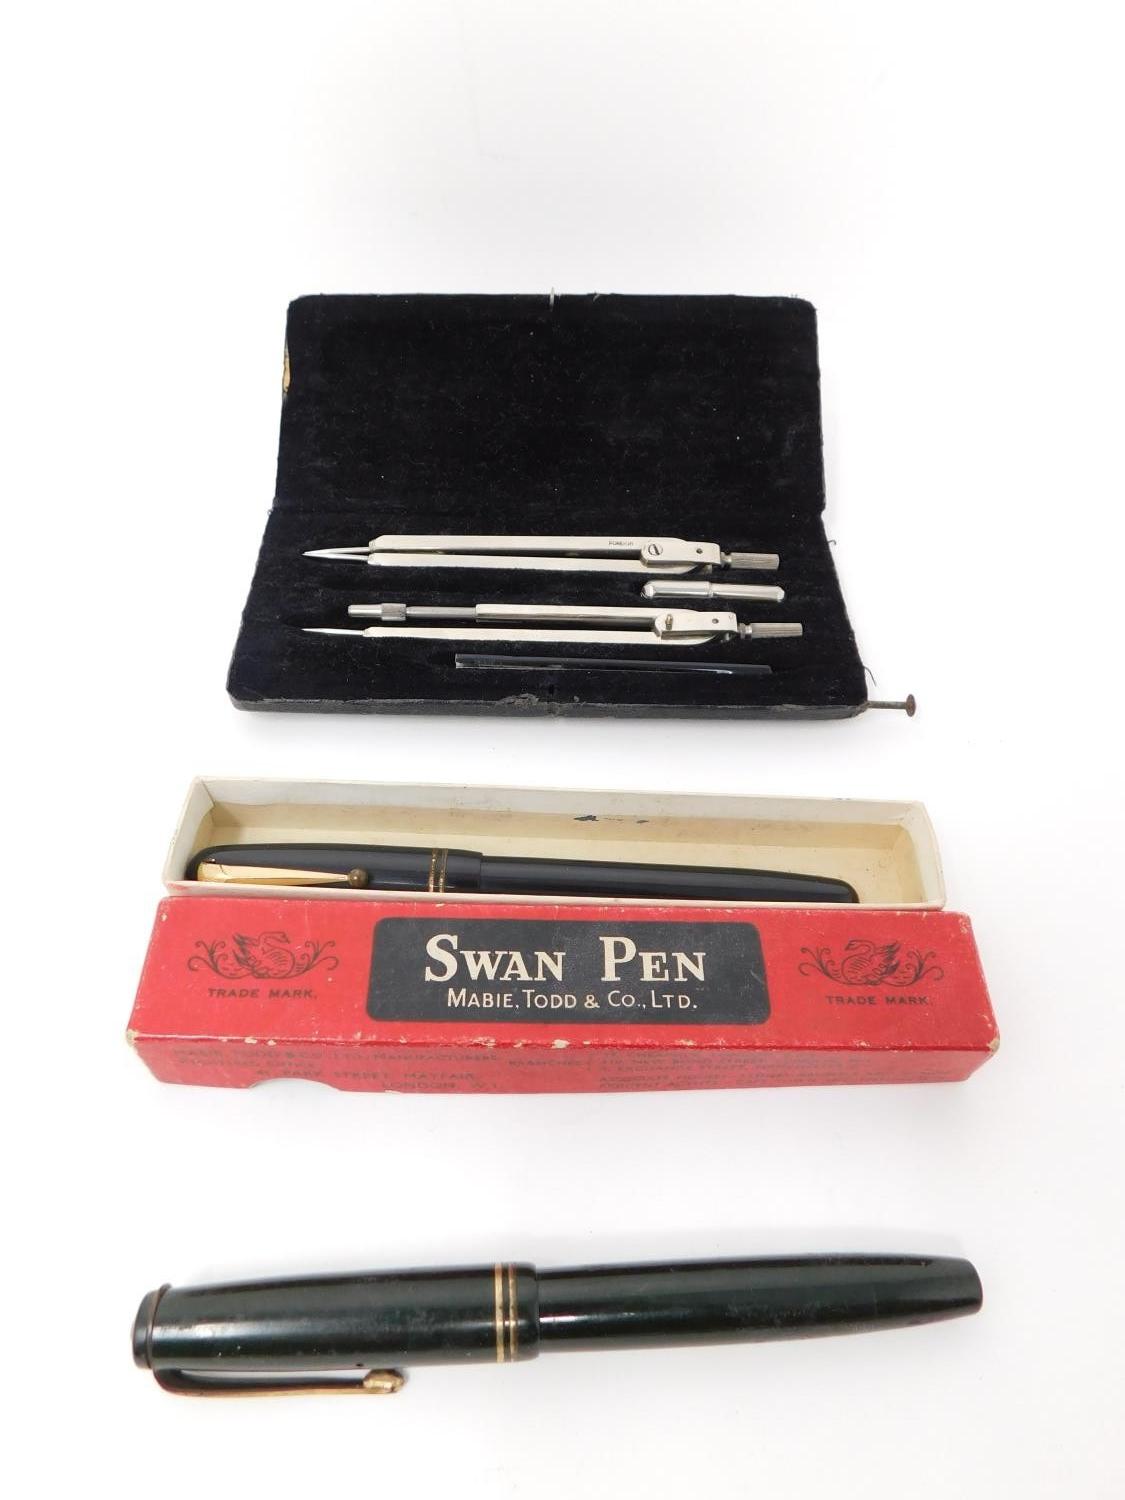 Two vintage fountain pens and a leather effect cased pair of compasses. One pen is a Parker